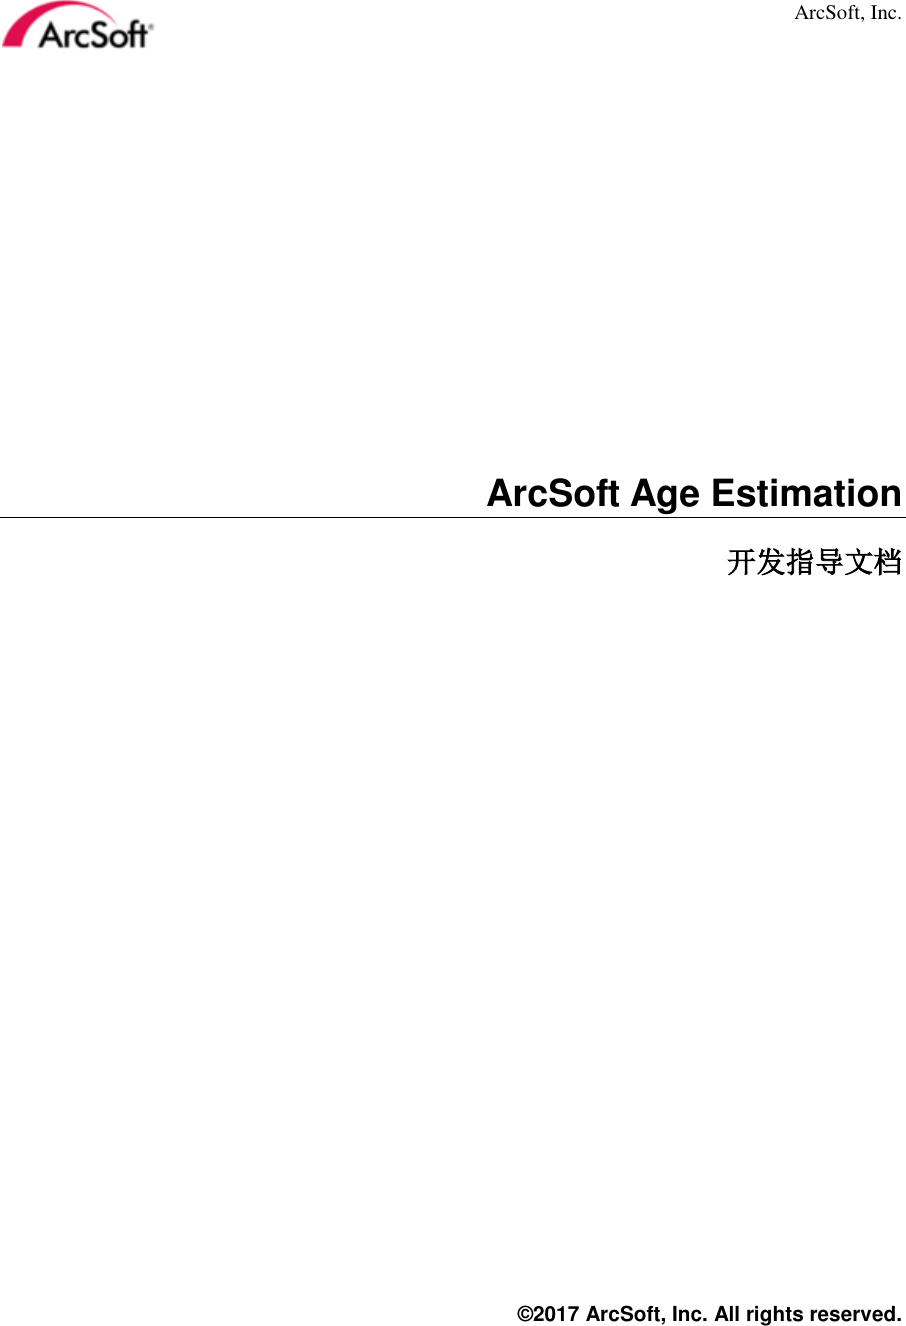 Page 1 of 10 - ArcSoft Product  AGE ESTIMATION DEVELOPER'S GUIDE